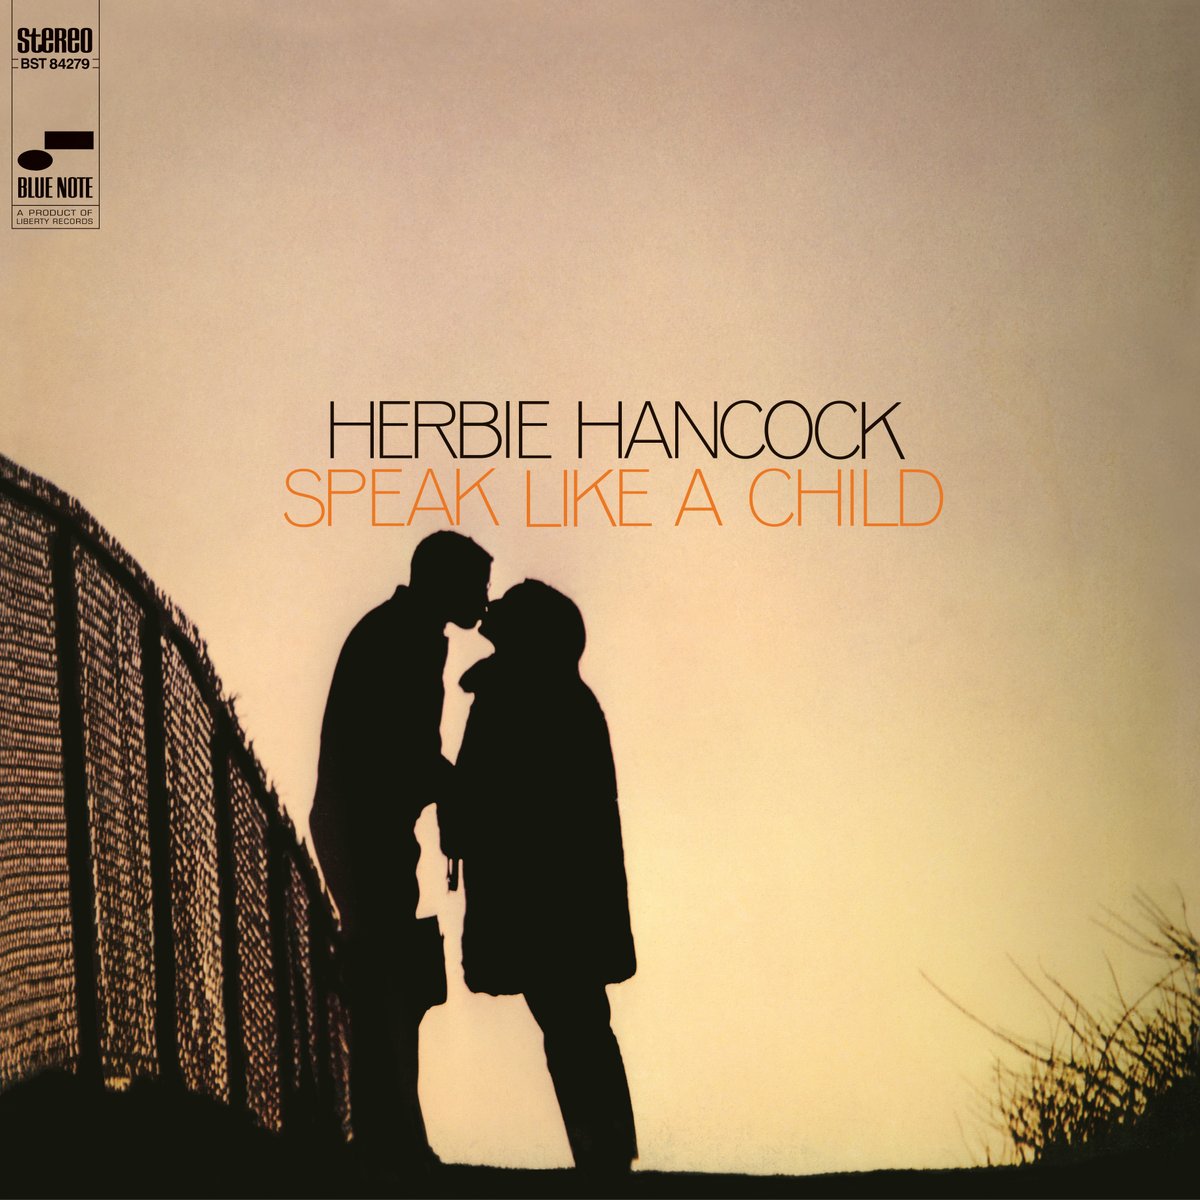 OUT NOW: @HerbieHancock 'Speak Like A Child' | AAA 180g Classic Vinyl Edition bluenote.lnk.to/HerbieHancock-…

On this innovative 1968 classic the pianist & composer added the unique coloring of flugelhorn, bass trombone & alto flute to his trio for an alluring set of originals.